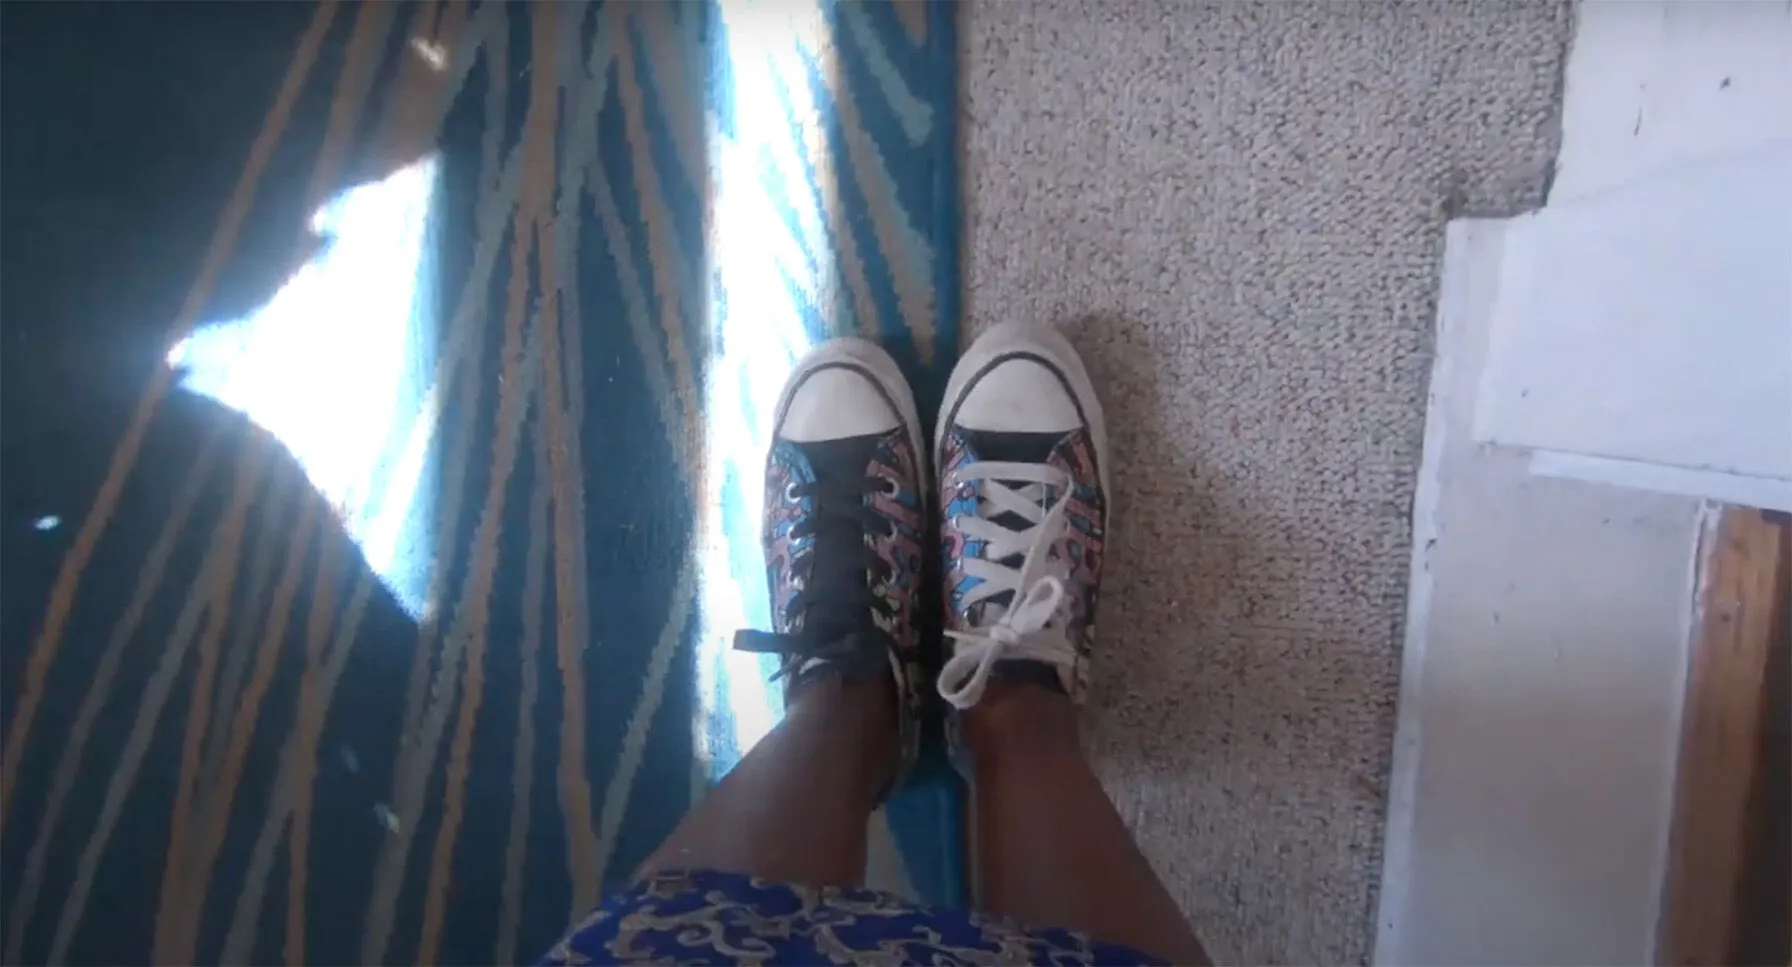 "Video Still, This is After" - Screenshot from a video of camera looking down at a pair of sneakers on a person's feet